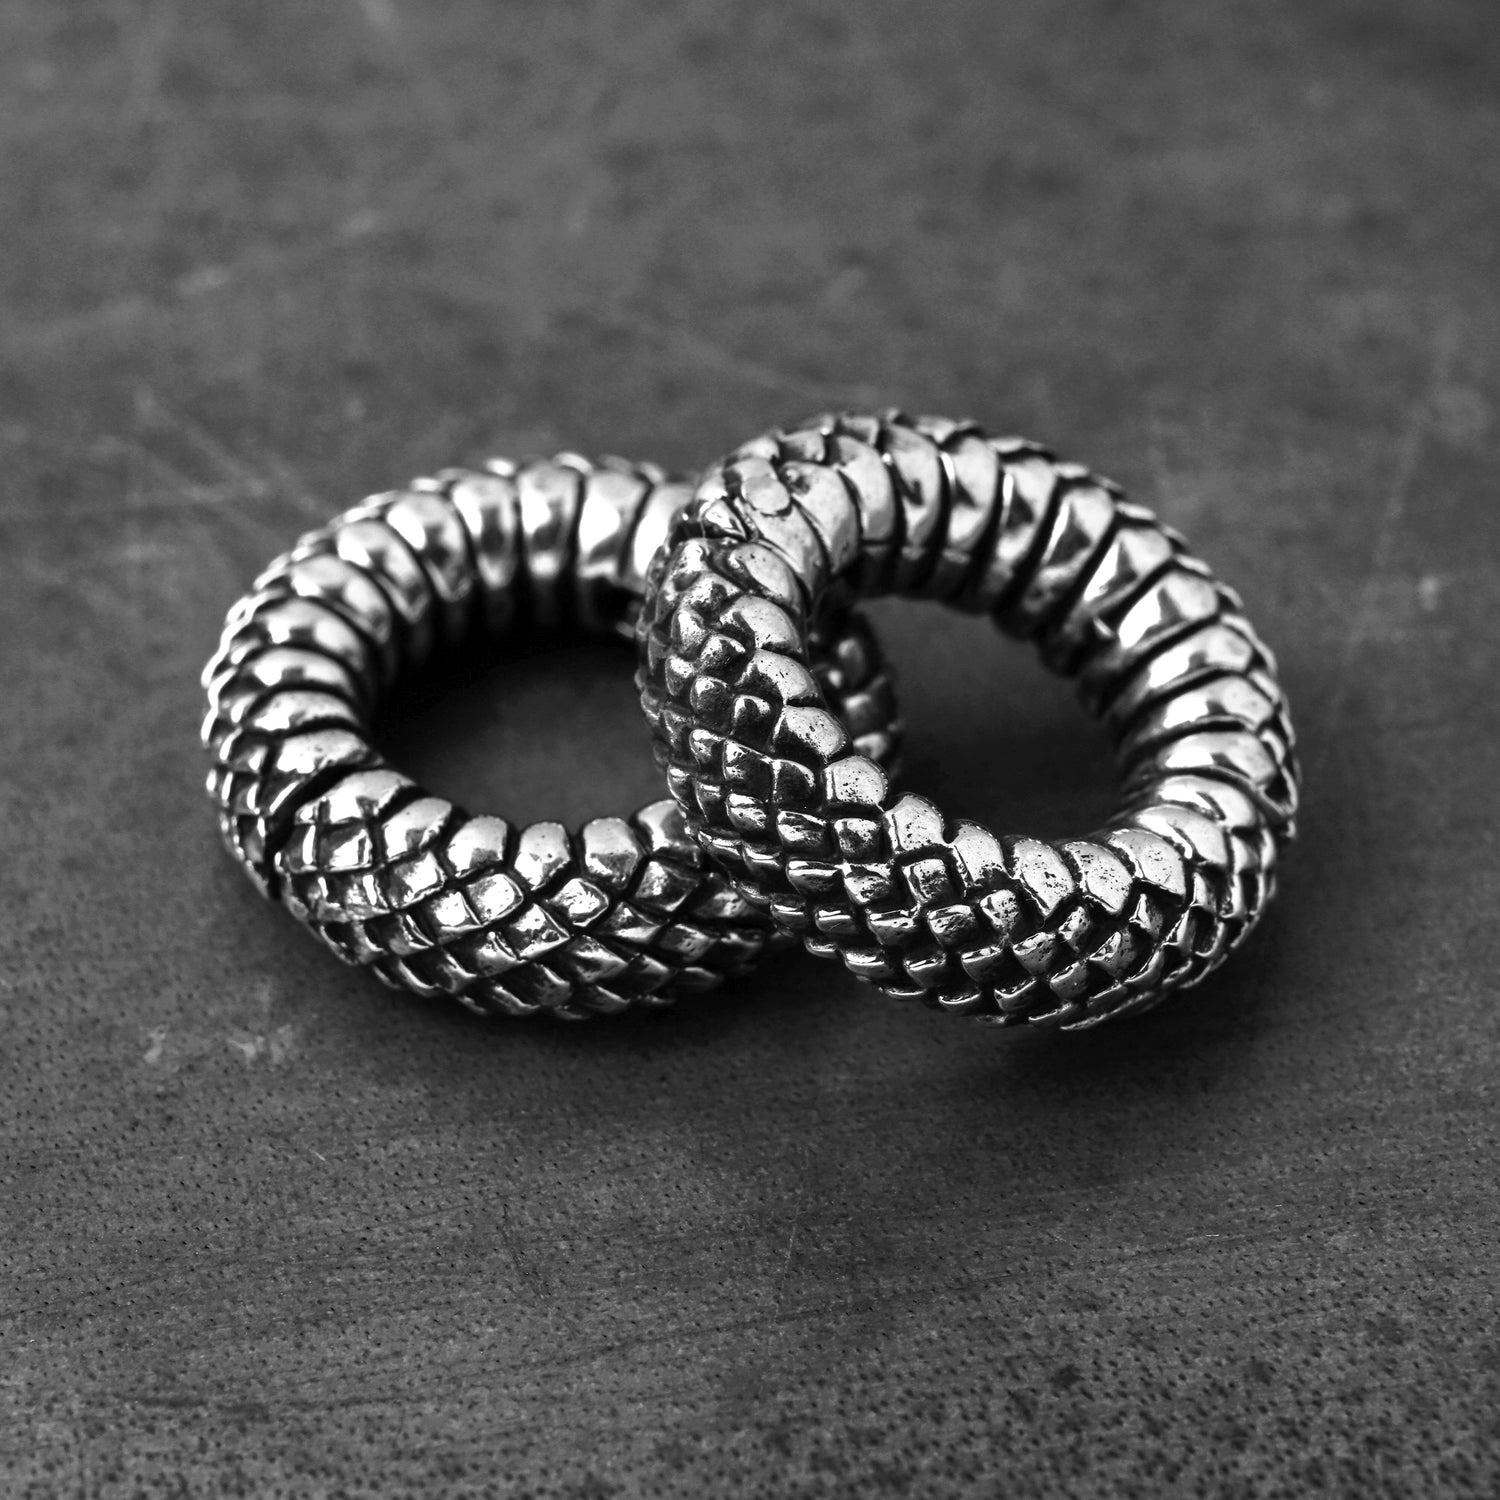 Snakes-skin-silver-weights-collection